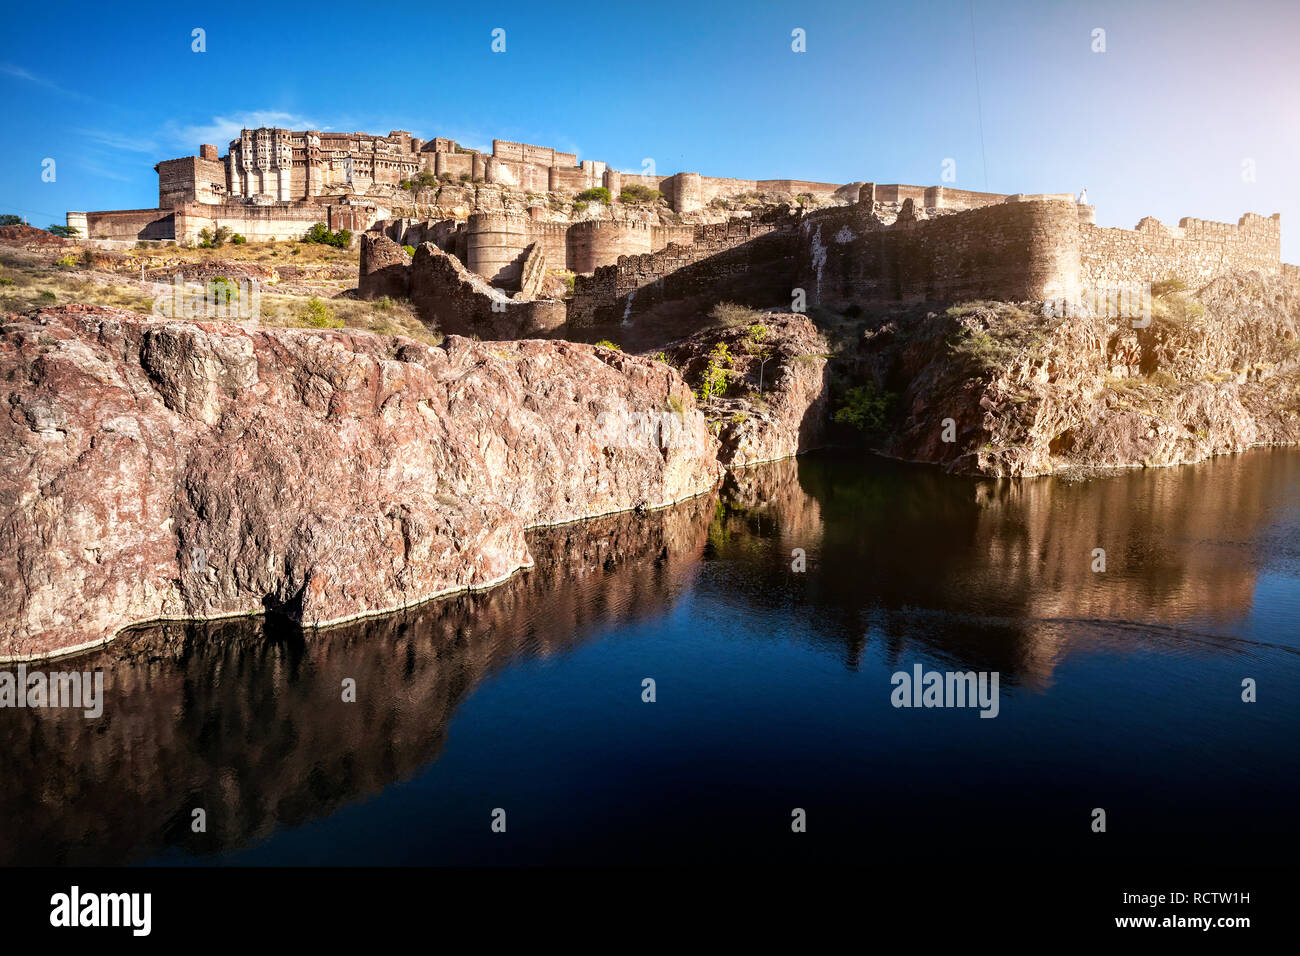 Mehrangarh fort on the hill near the pond at blue sky in Jodhpur, Rajasthan, India Stock Photo